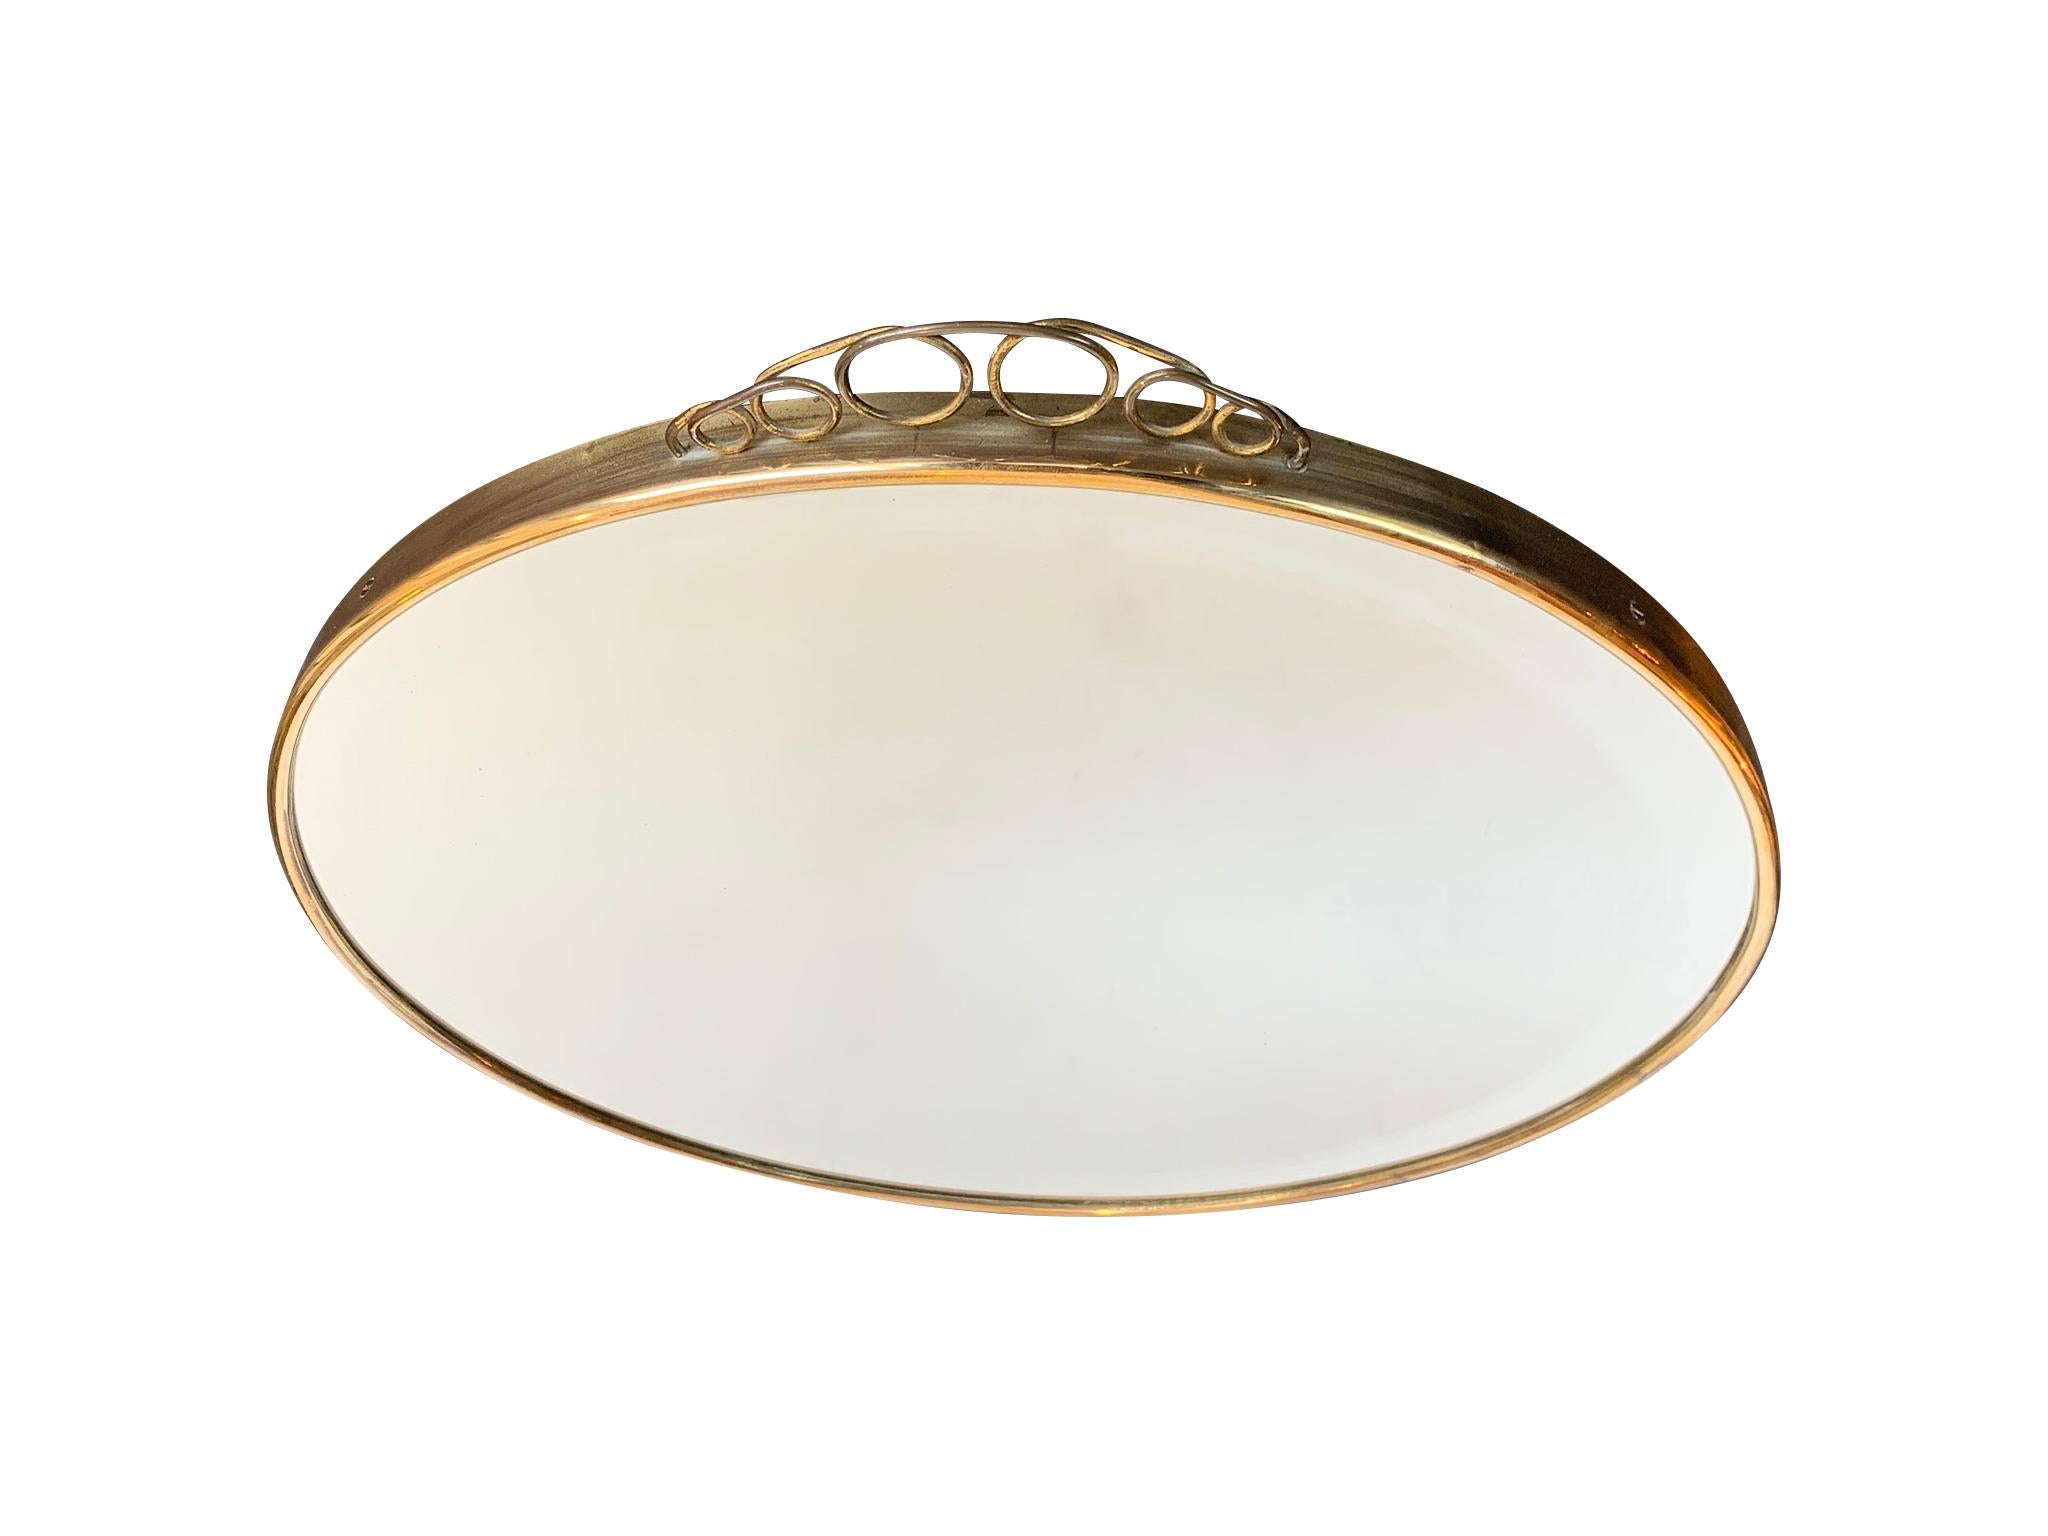 Mid-Century Modern 1950s Italian Circular Mirror with Bevelled Glass, Brass Frame and Top Detail